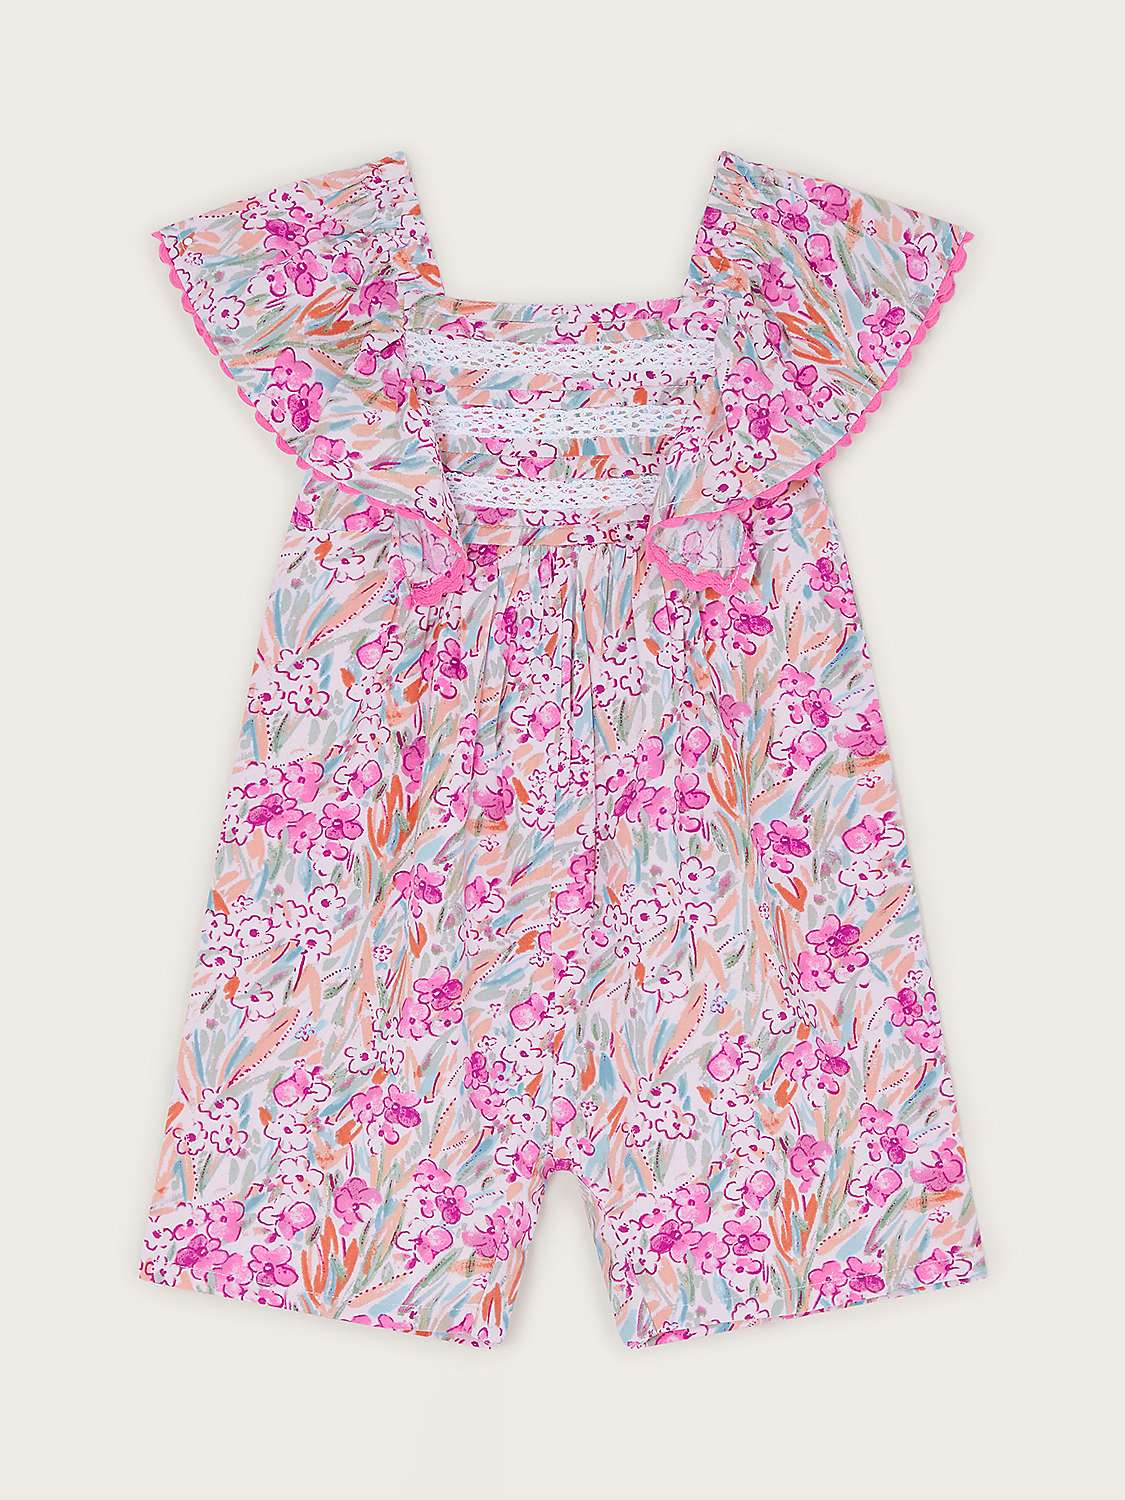 Buy Monsoon Baby Floral Print Lace Trim Frill Romper, Magenta Online at johnlewis.com